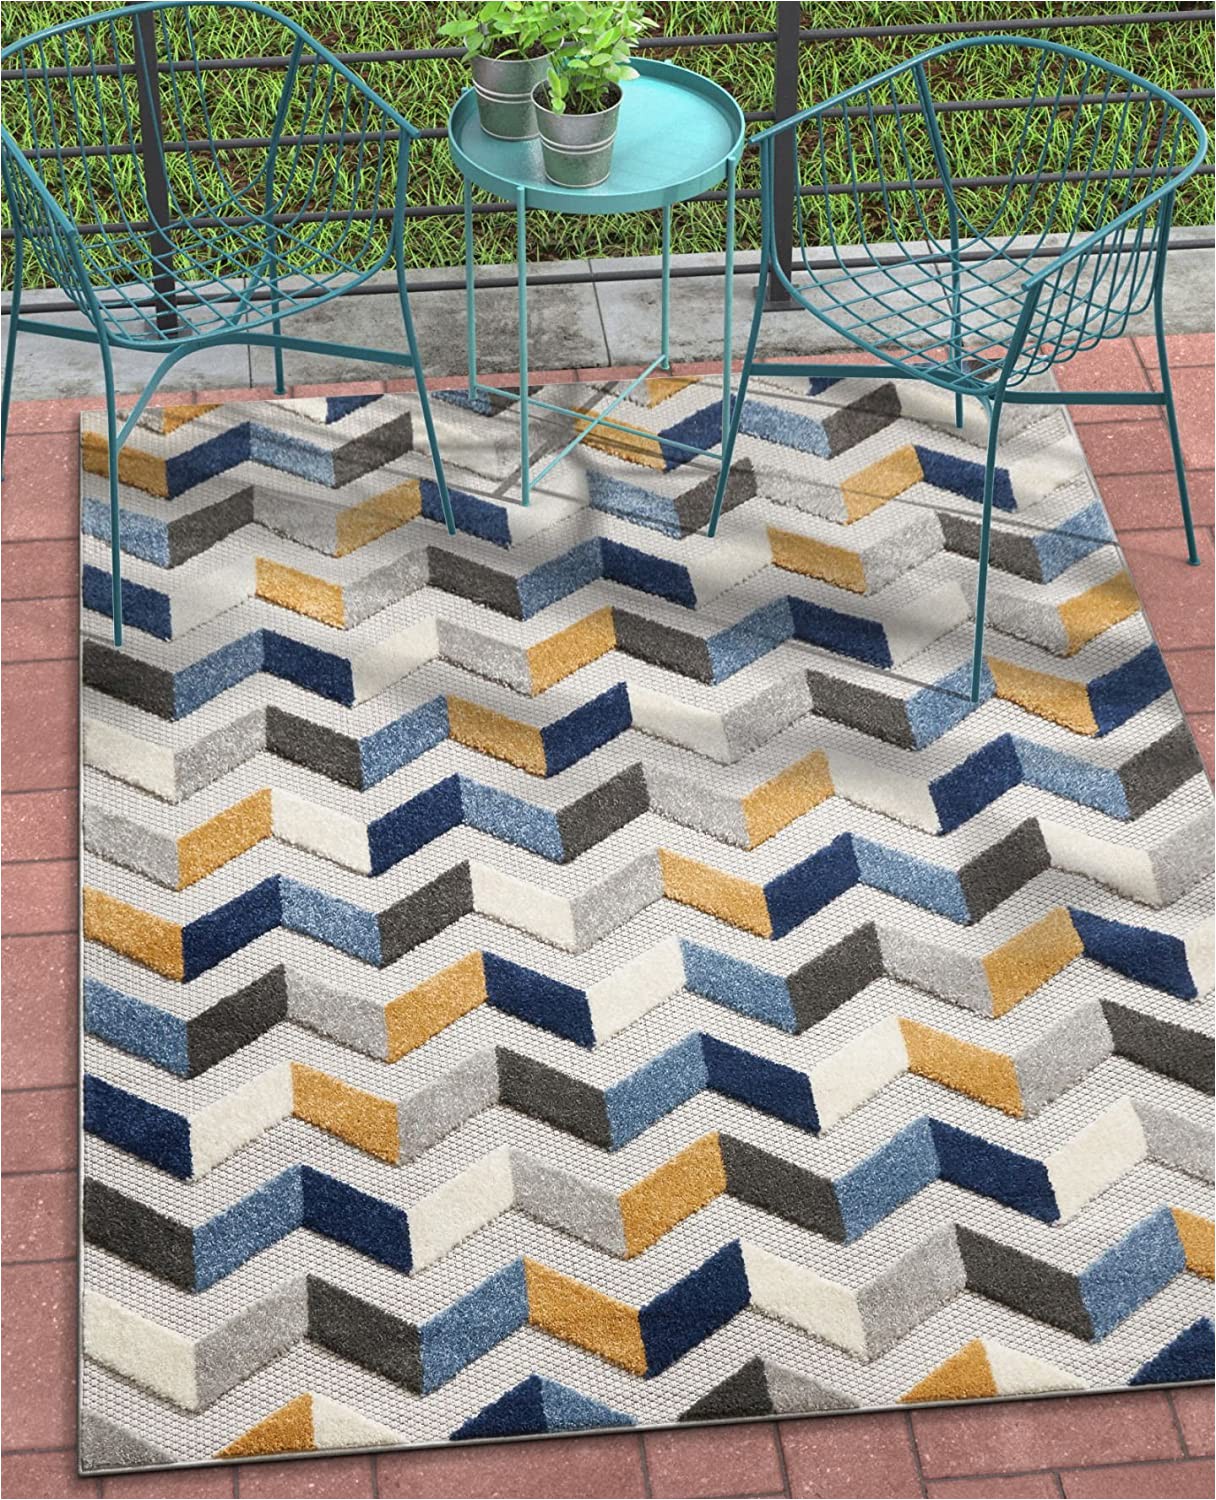 10 X 10 Outdoor area Rug Well Woven Maui Blue Indoor Outdoor Chevron area Rug 8×11 7 10" X 9 10" High Traffic Stain Resistant Modern Geometric Carpet